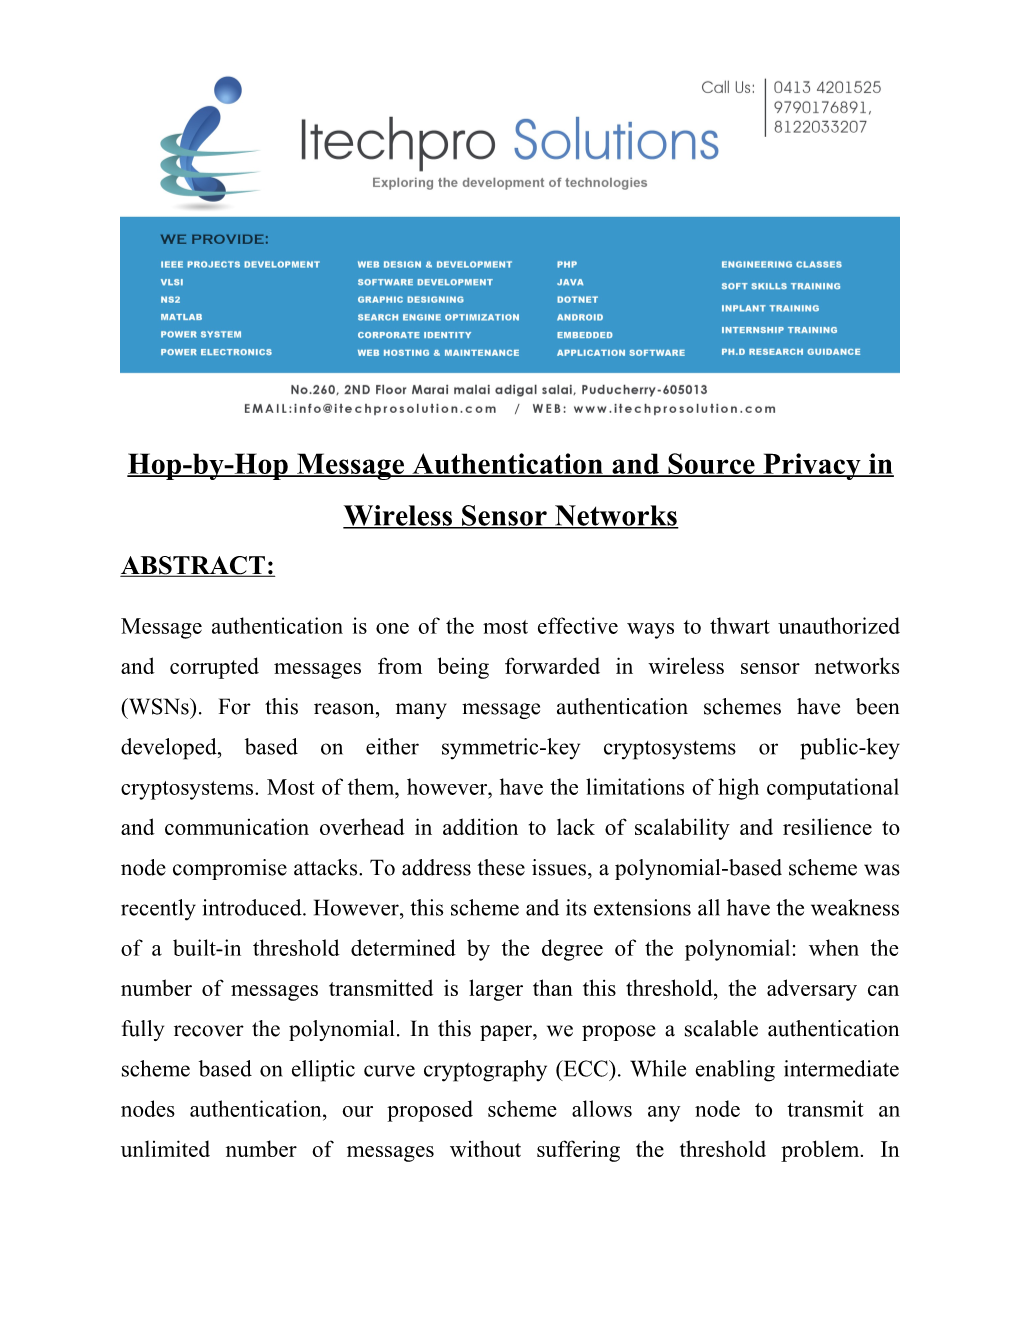 Hop-By-Hop Message Authentication and Source Privacy in Wireless Sensor Networks